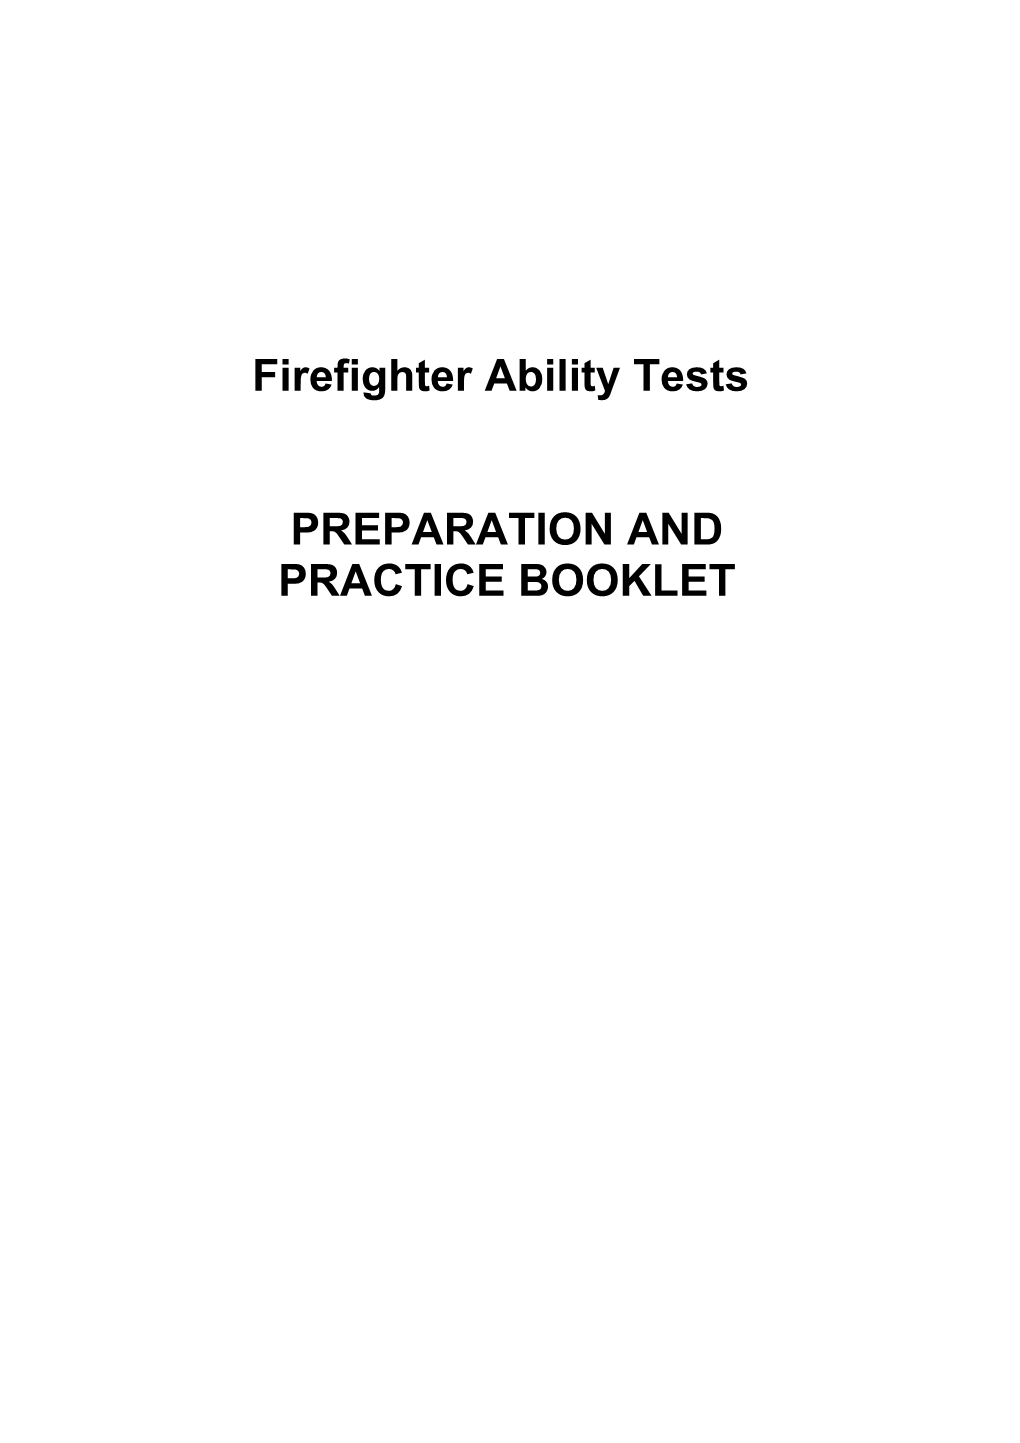 Firefighter Ability Tests